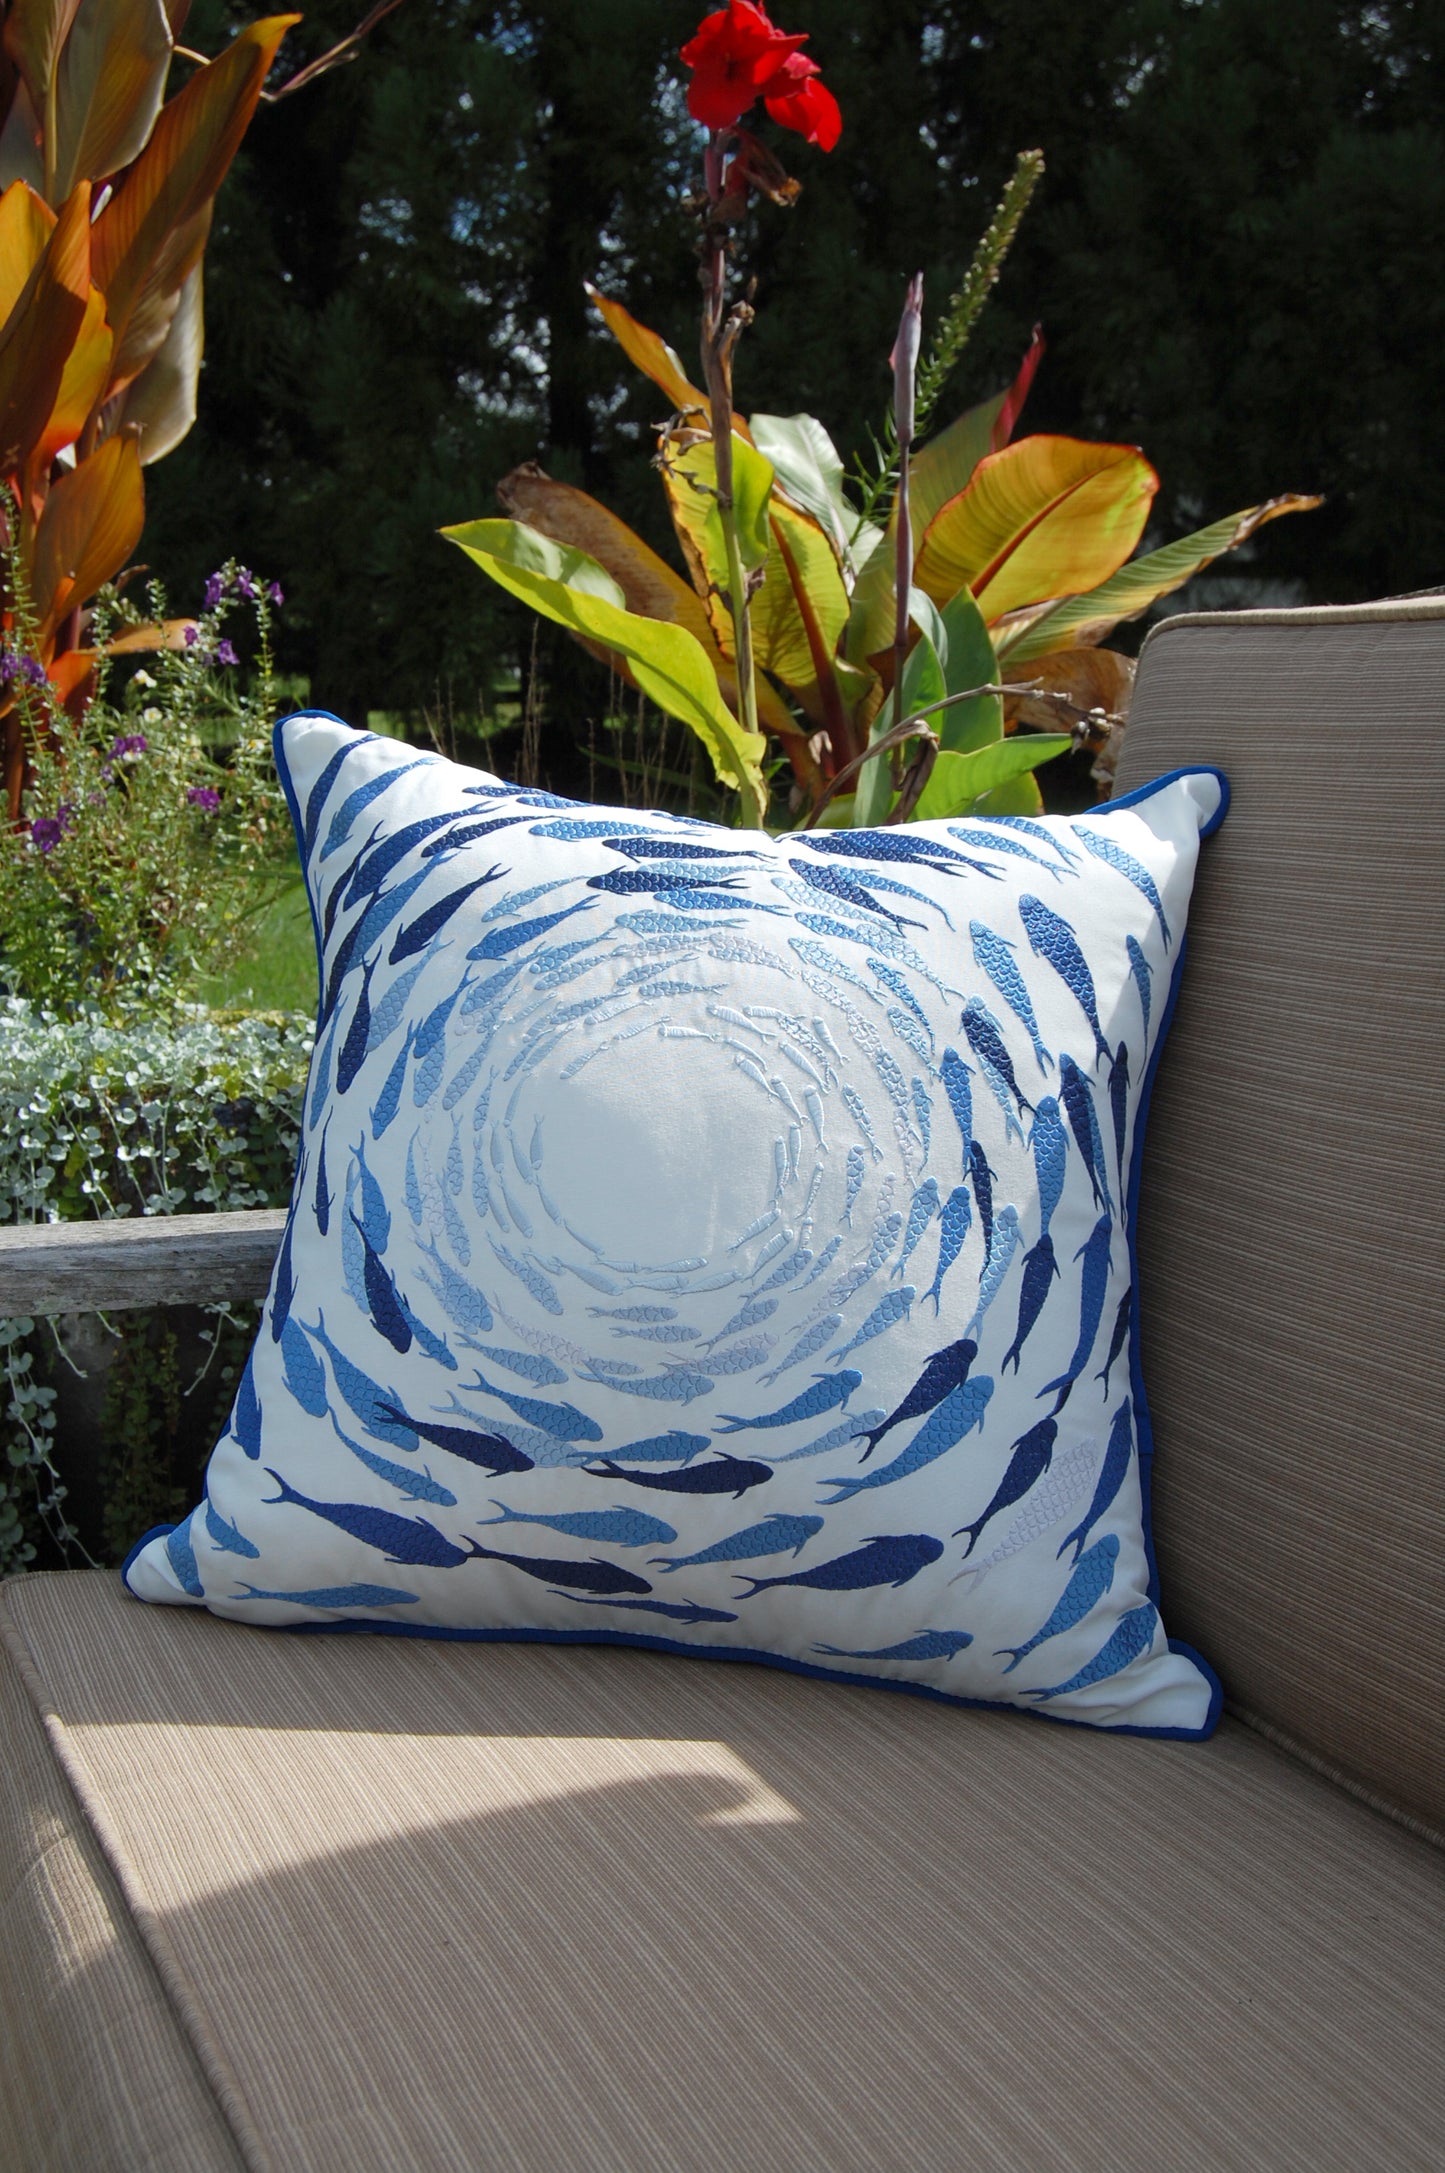 Azure Fish School outdoor pillow pictured on a patio couch.